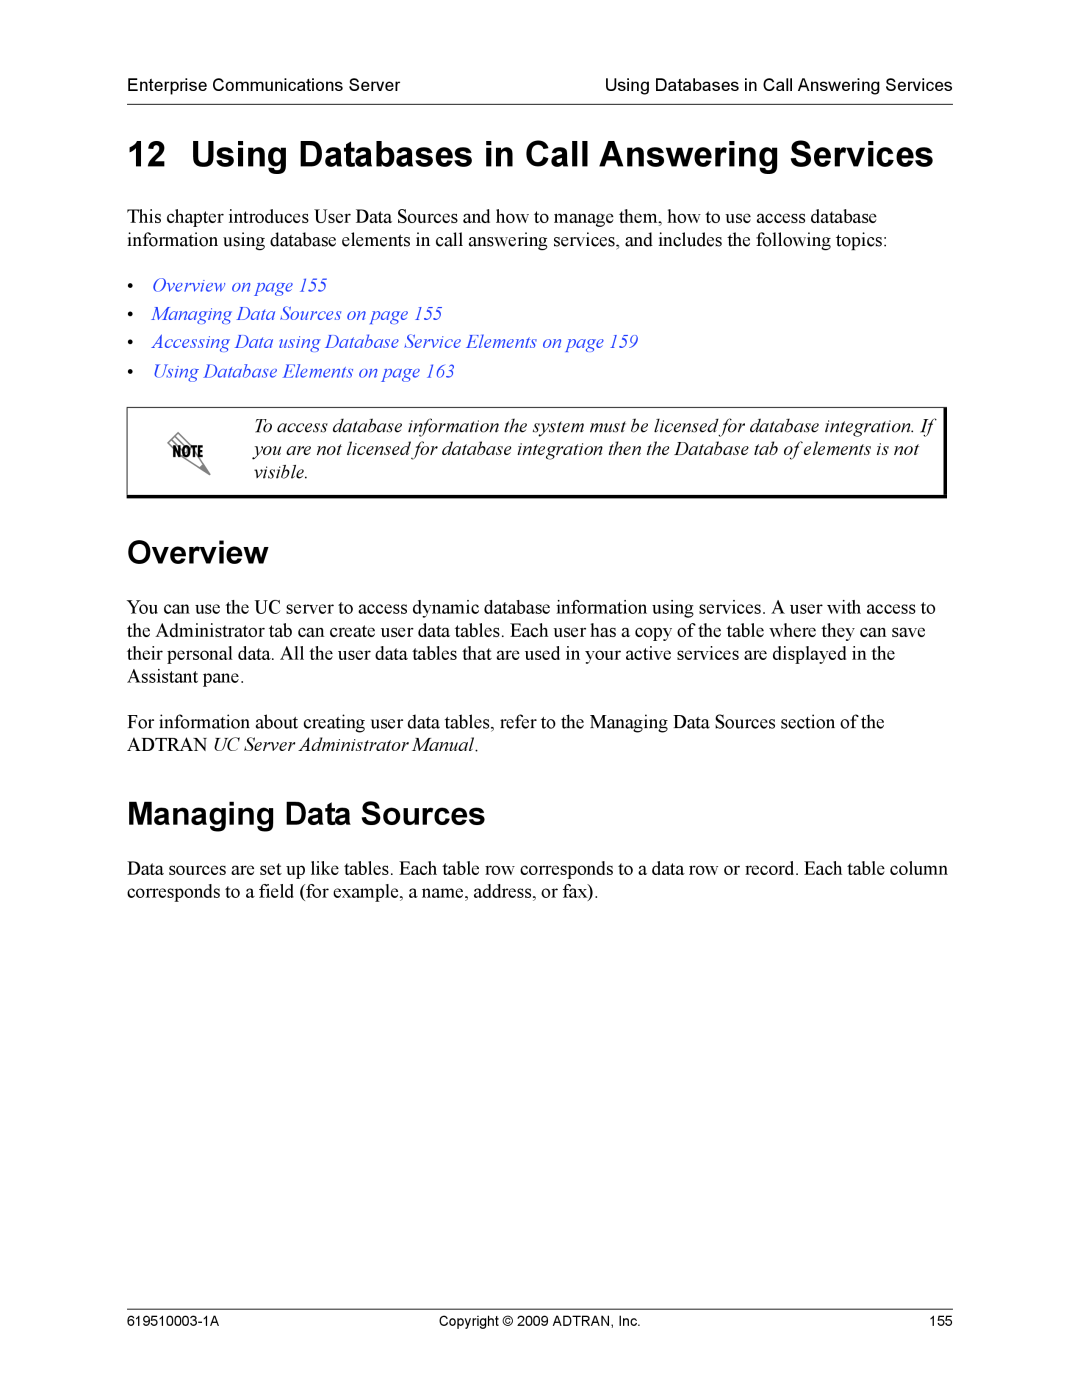 ADTRAN 619510003-1A Using Databases in Call Answering Services, Managing Data Sources, Using Database Elements on page 